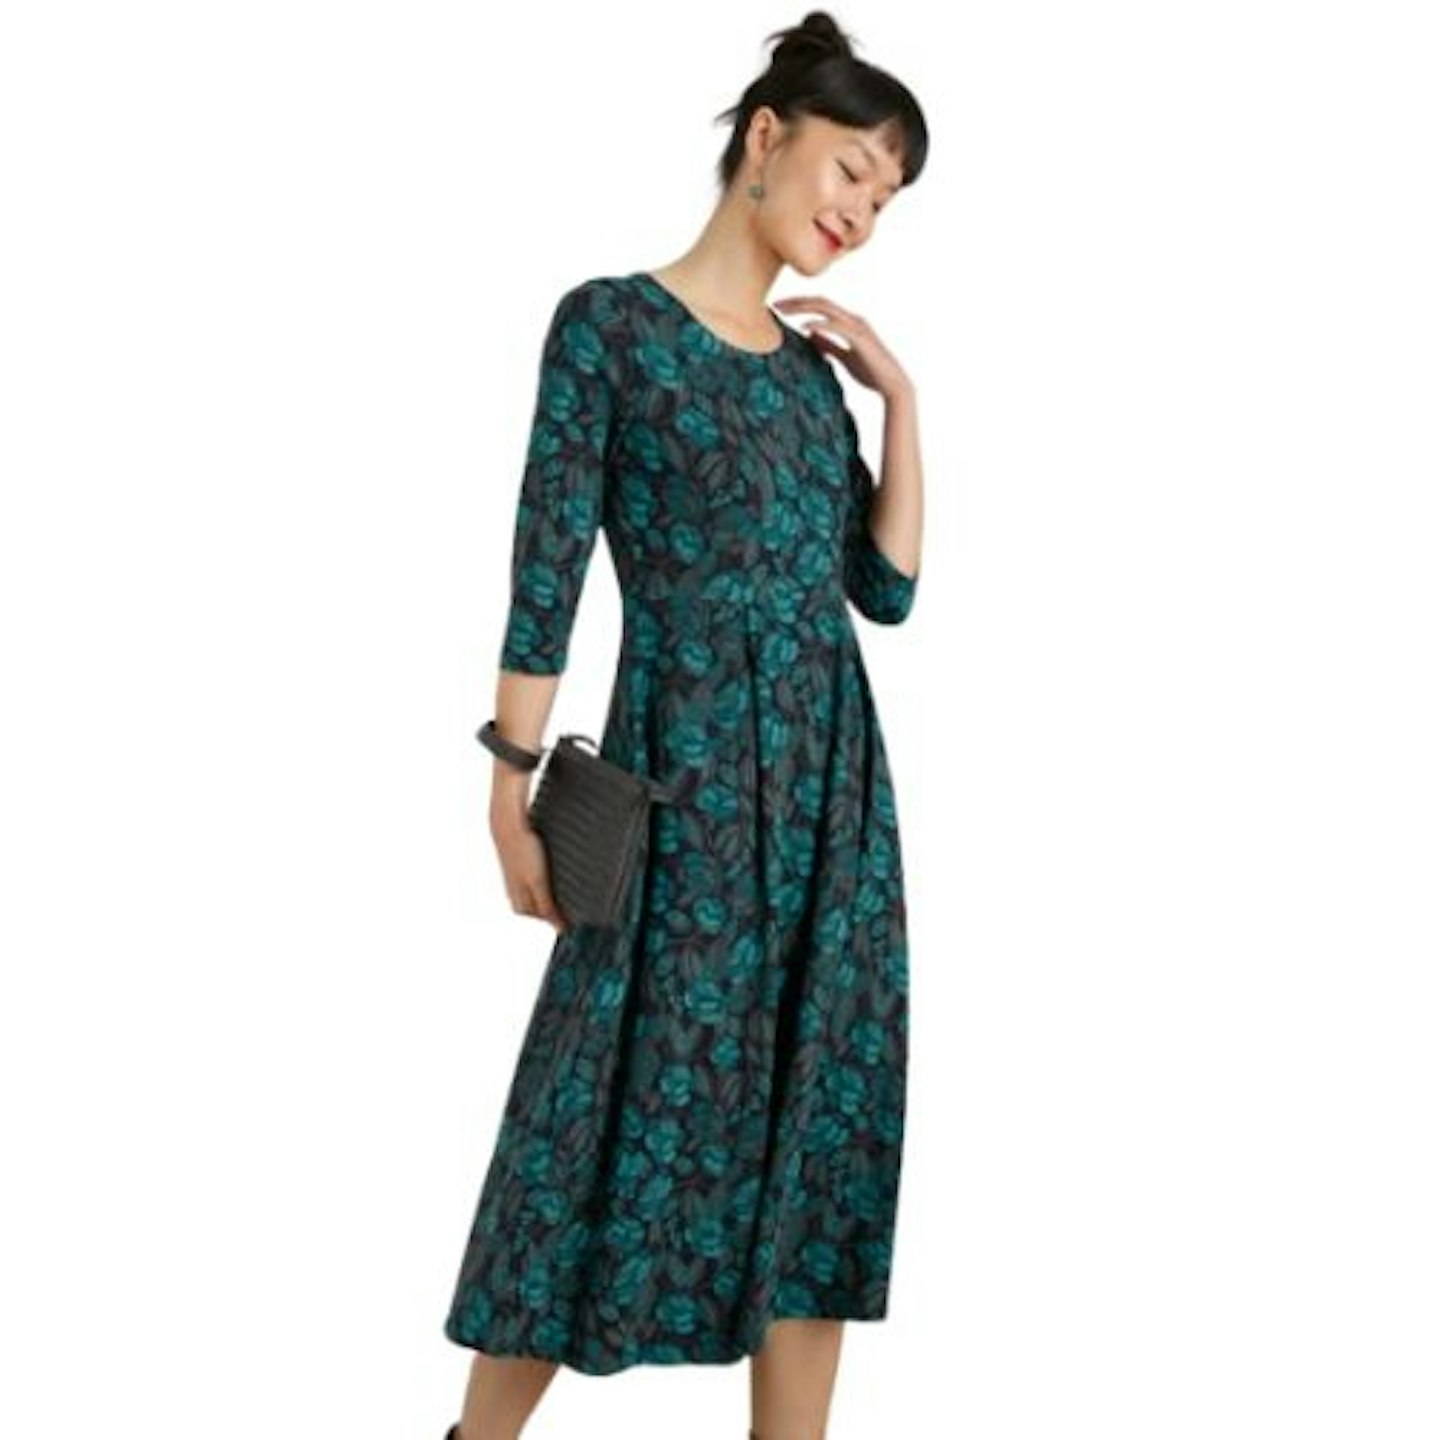 The best special occasion dresses for older ladies